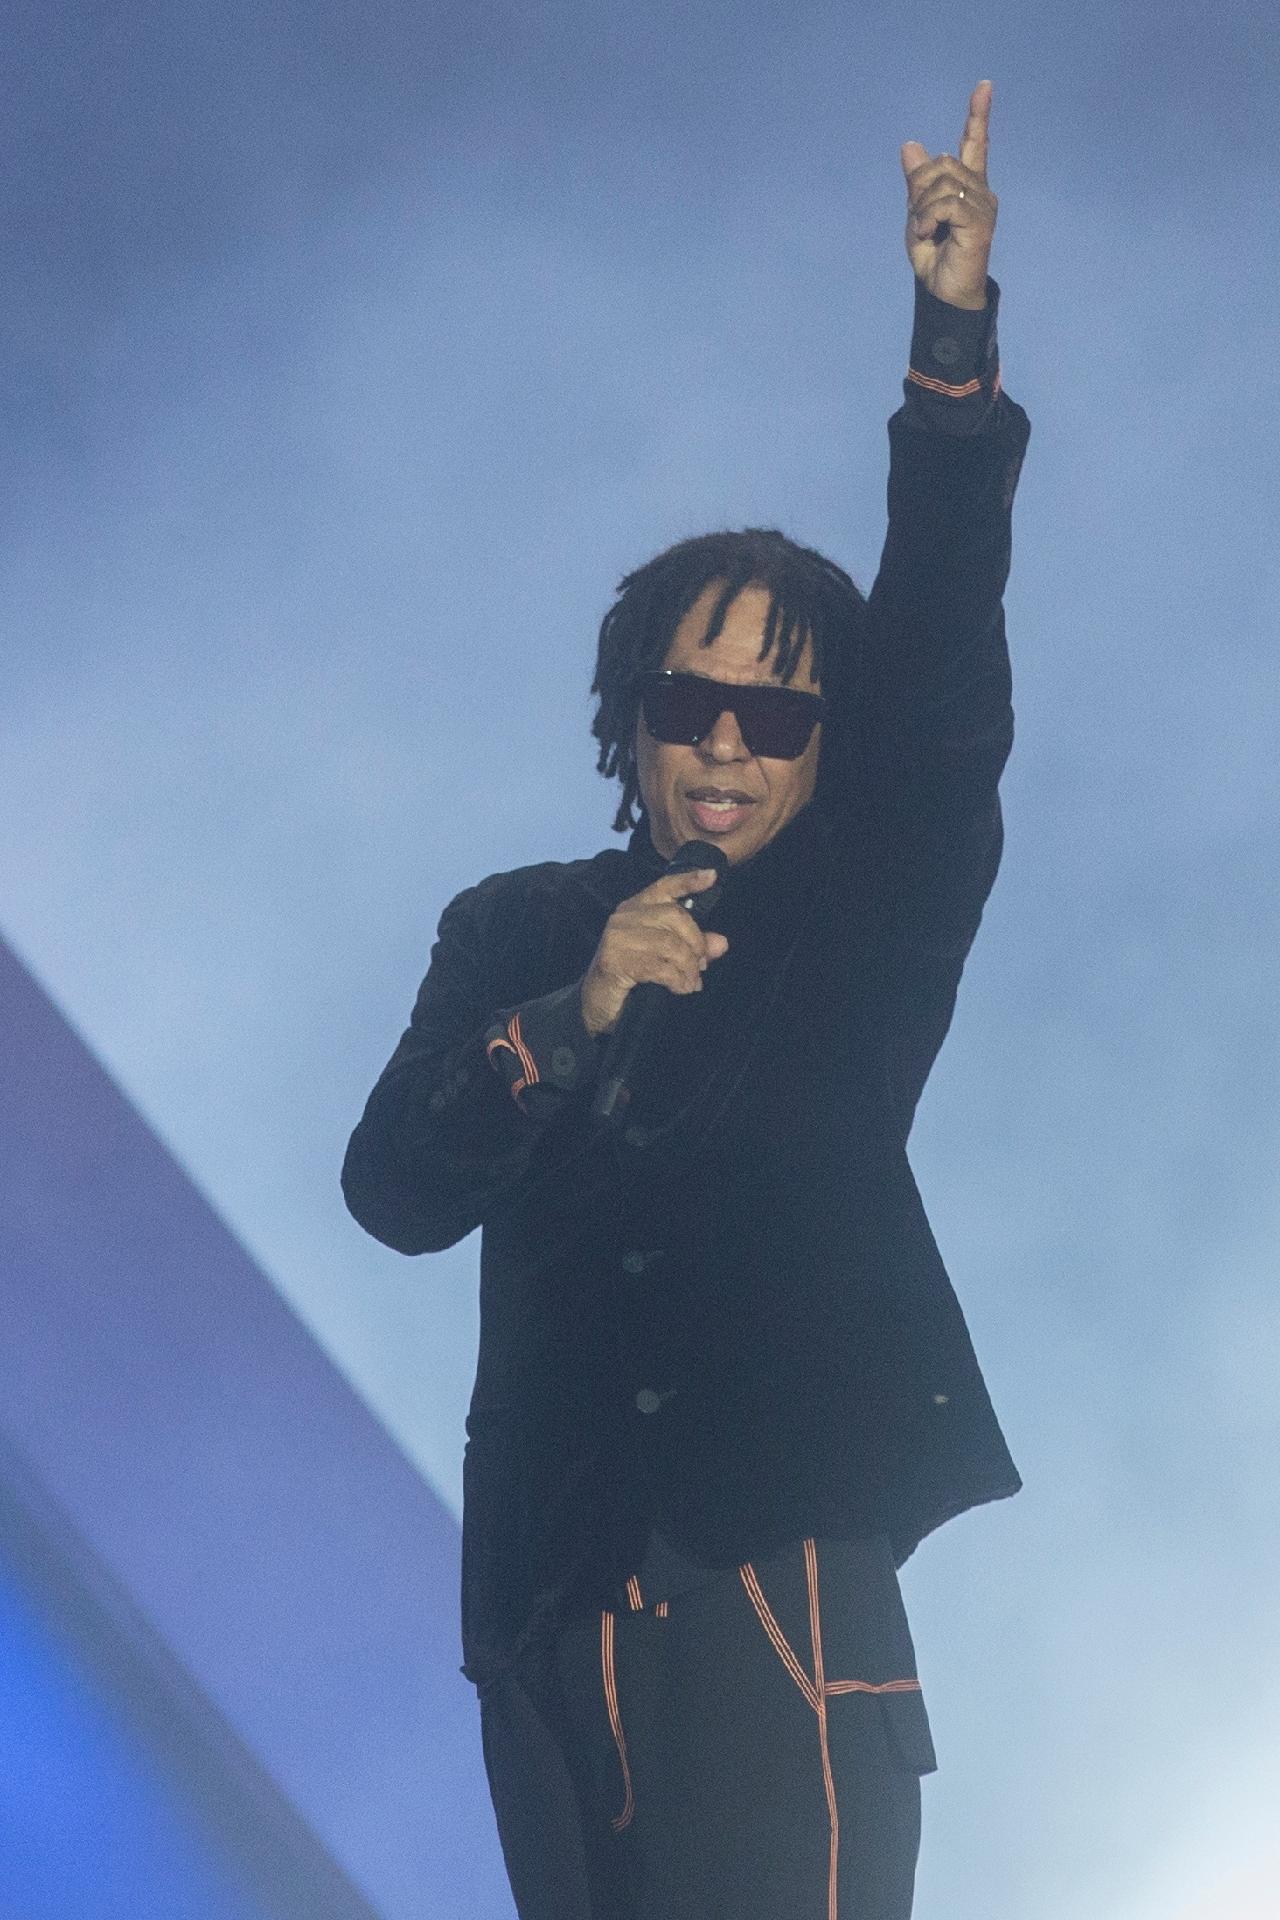 Javan opens the show on the Mundo Stage on the sixth day of Rock in Rio - Júlio Guimarães/UOL